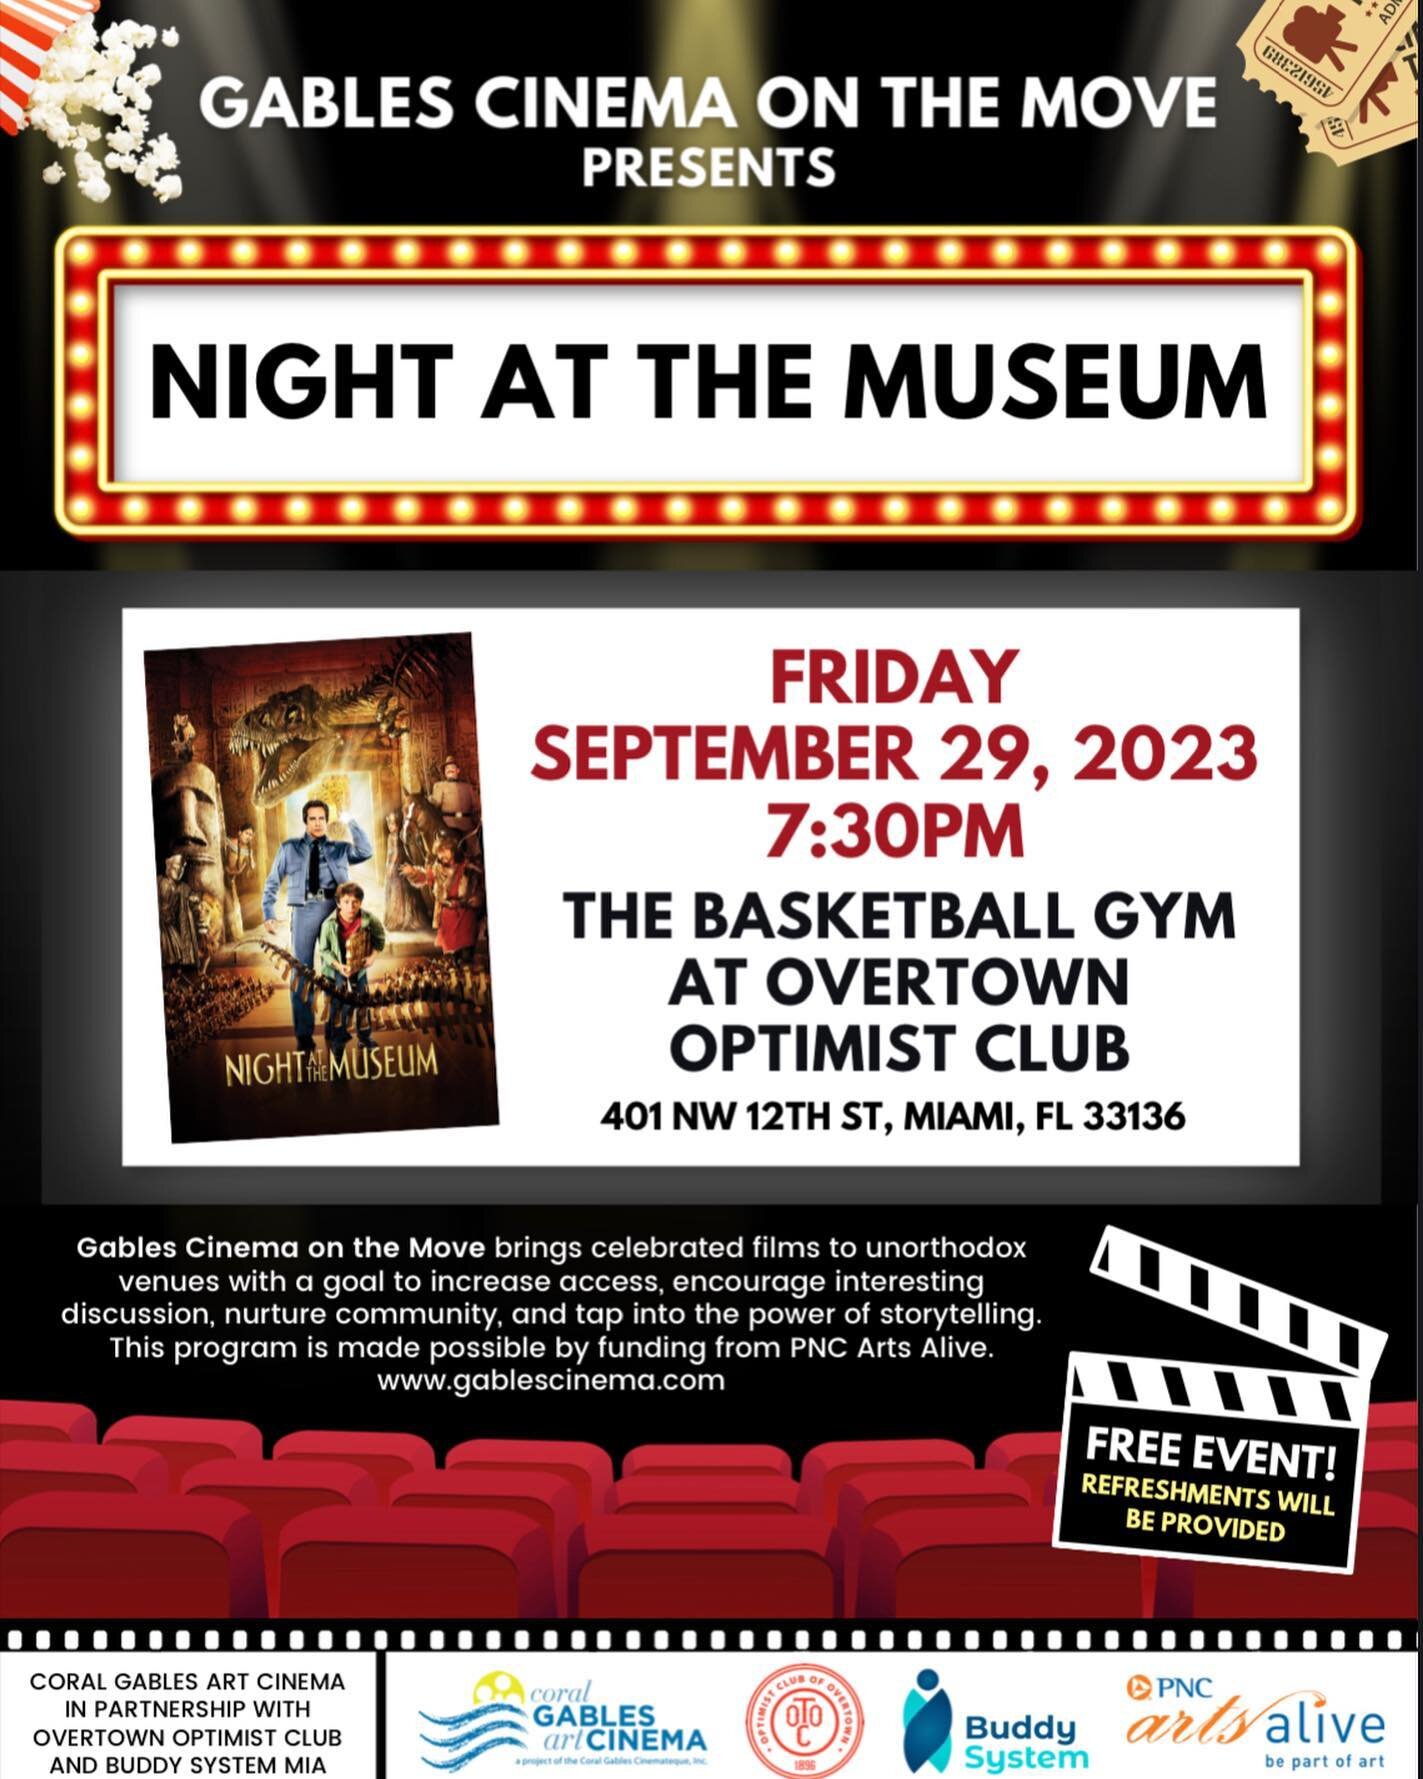 Join Coral Gables Art Cinema, the Overtown Optimist Club, and Buddy System at 7:30 pm on Friday, September 29 for a FREE screening of the magical children's classic Night at the Museum at the Overtown Optimist Club Basketball Gym, located at 401 NW 1